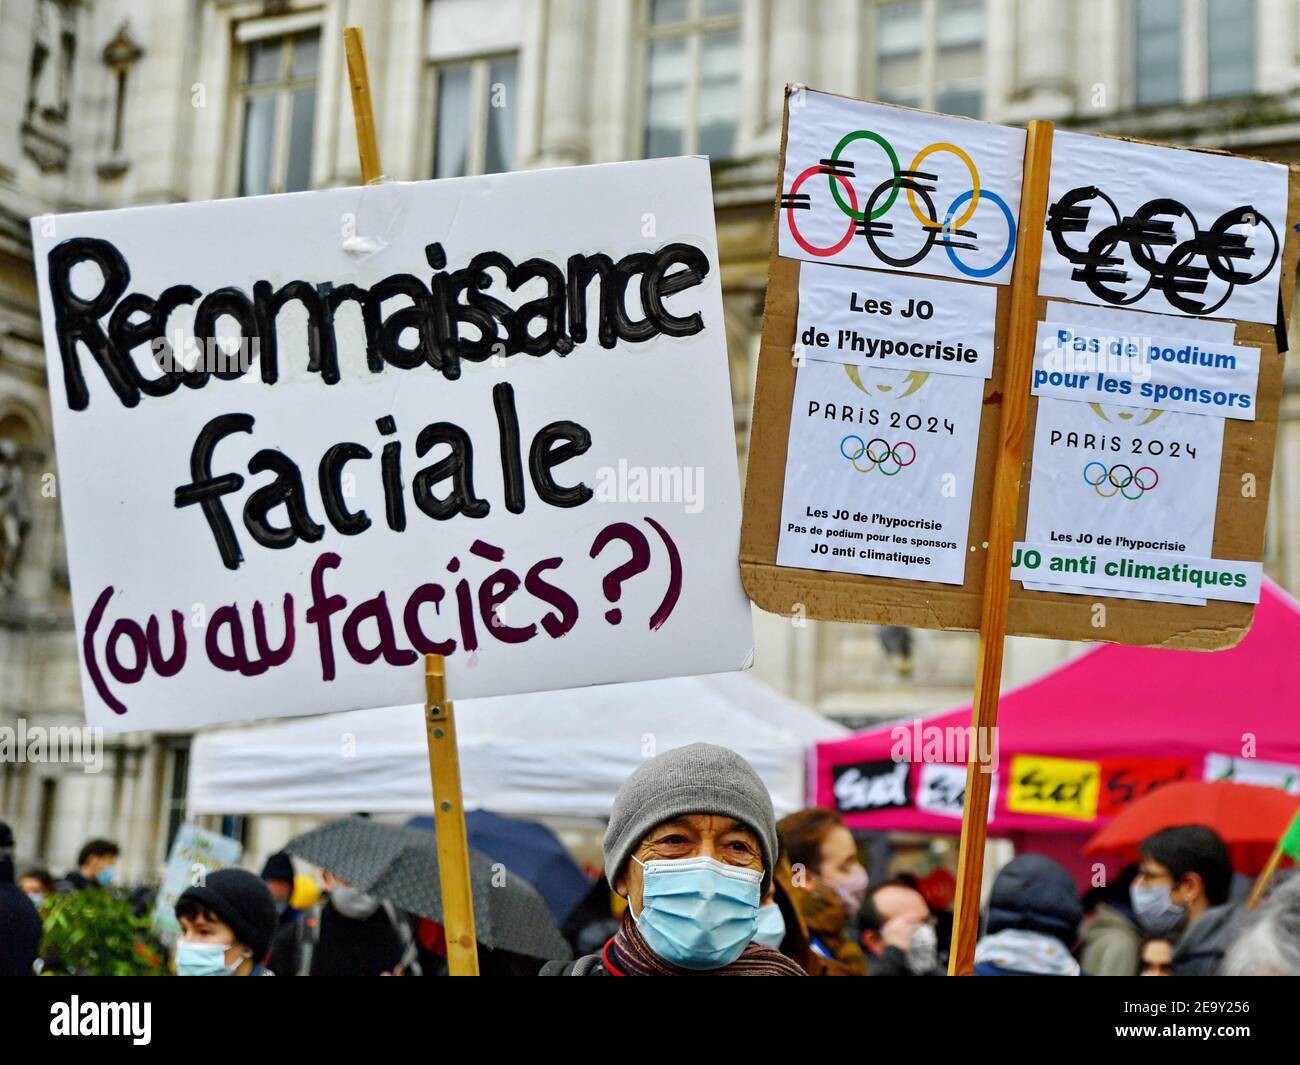 protest-against-the-summer-olympic-games-2024-in-front-of-the-hotel-de-ville-city-hall-in-paris-france-on-february-06-2021-photo-by-karim-ait-adjedjouavenir-picturesabacapresscom-1700108644.jpg